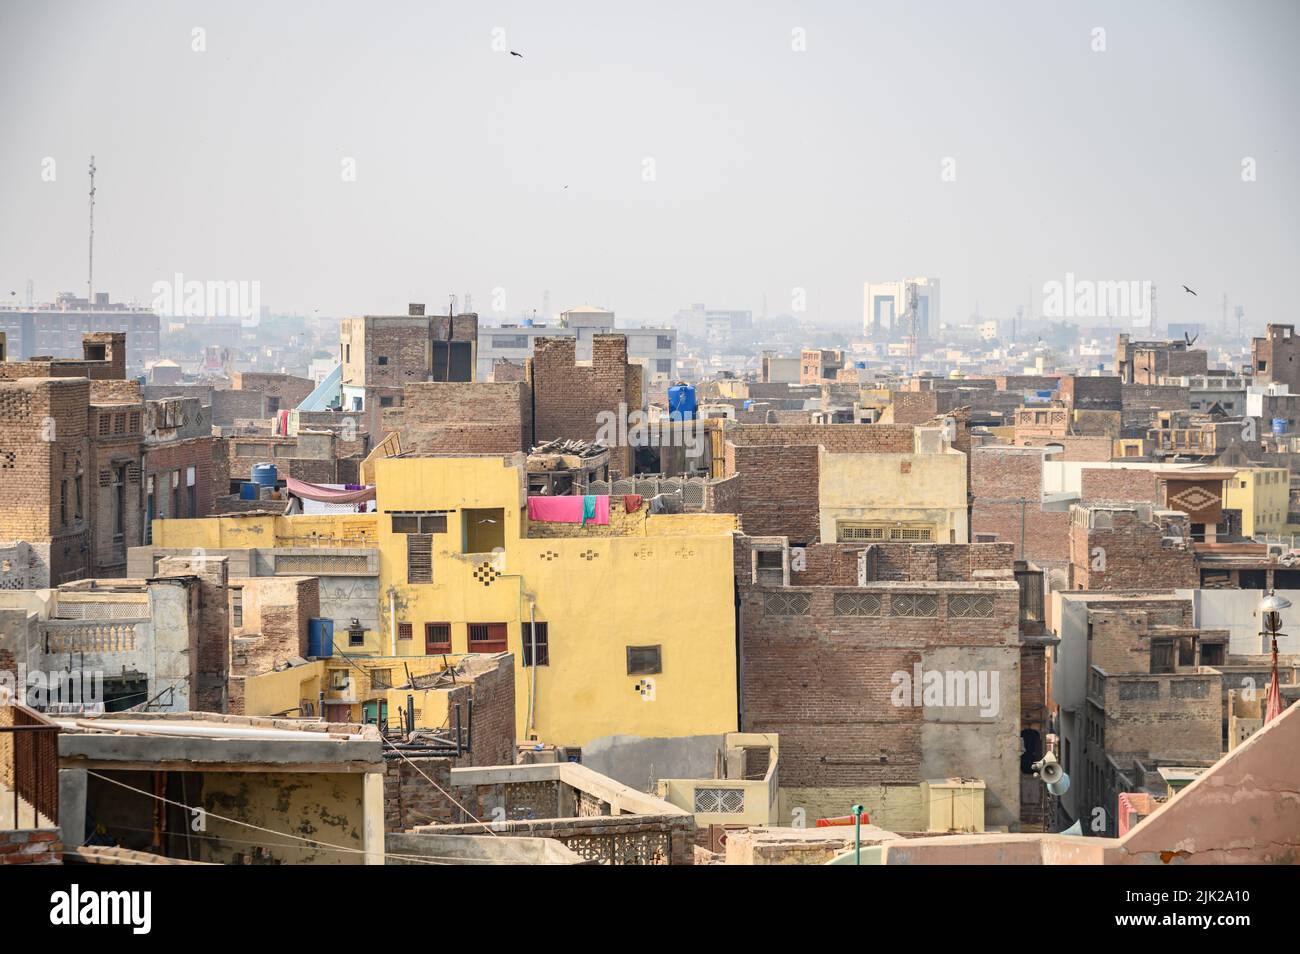 Misty skyline of Multan and  its old city view Stock Photo